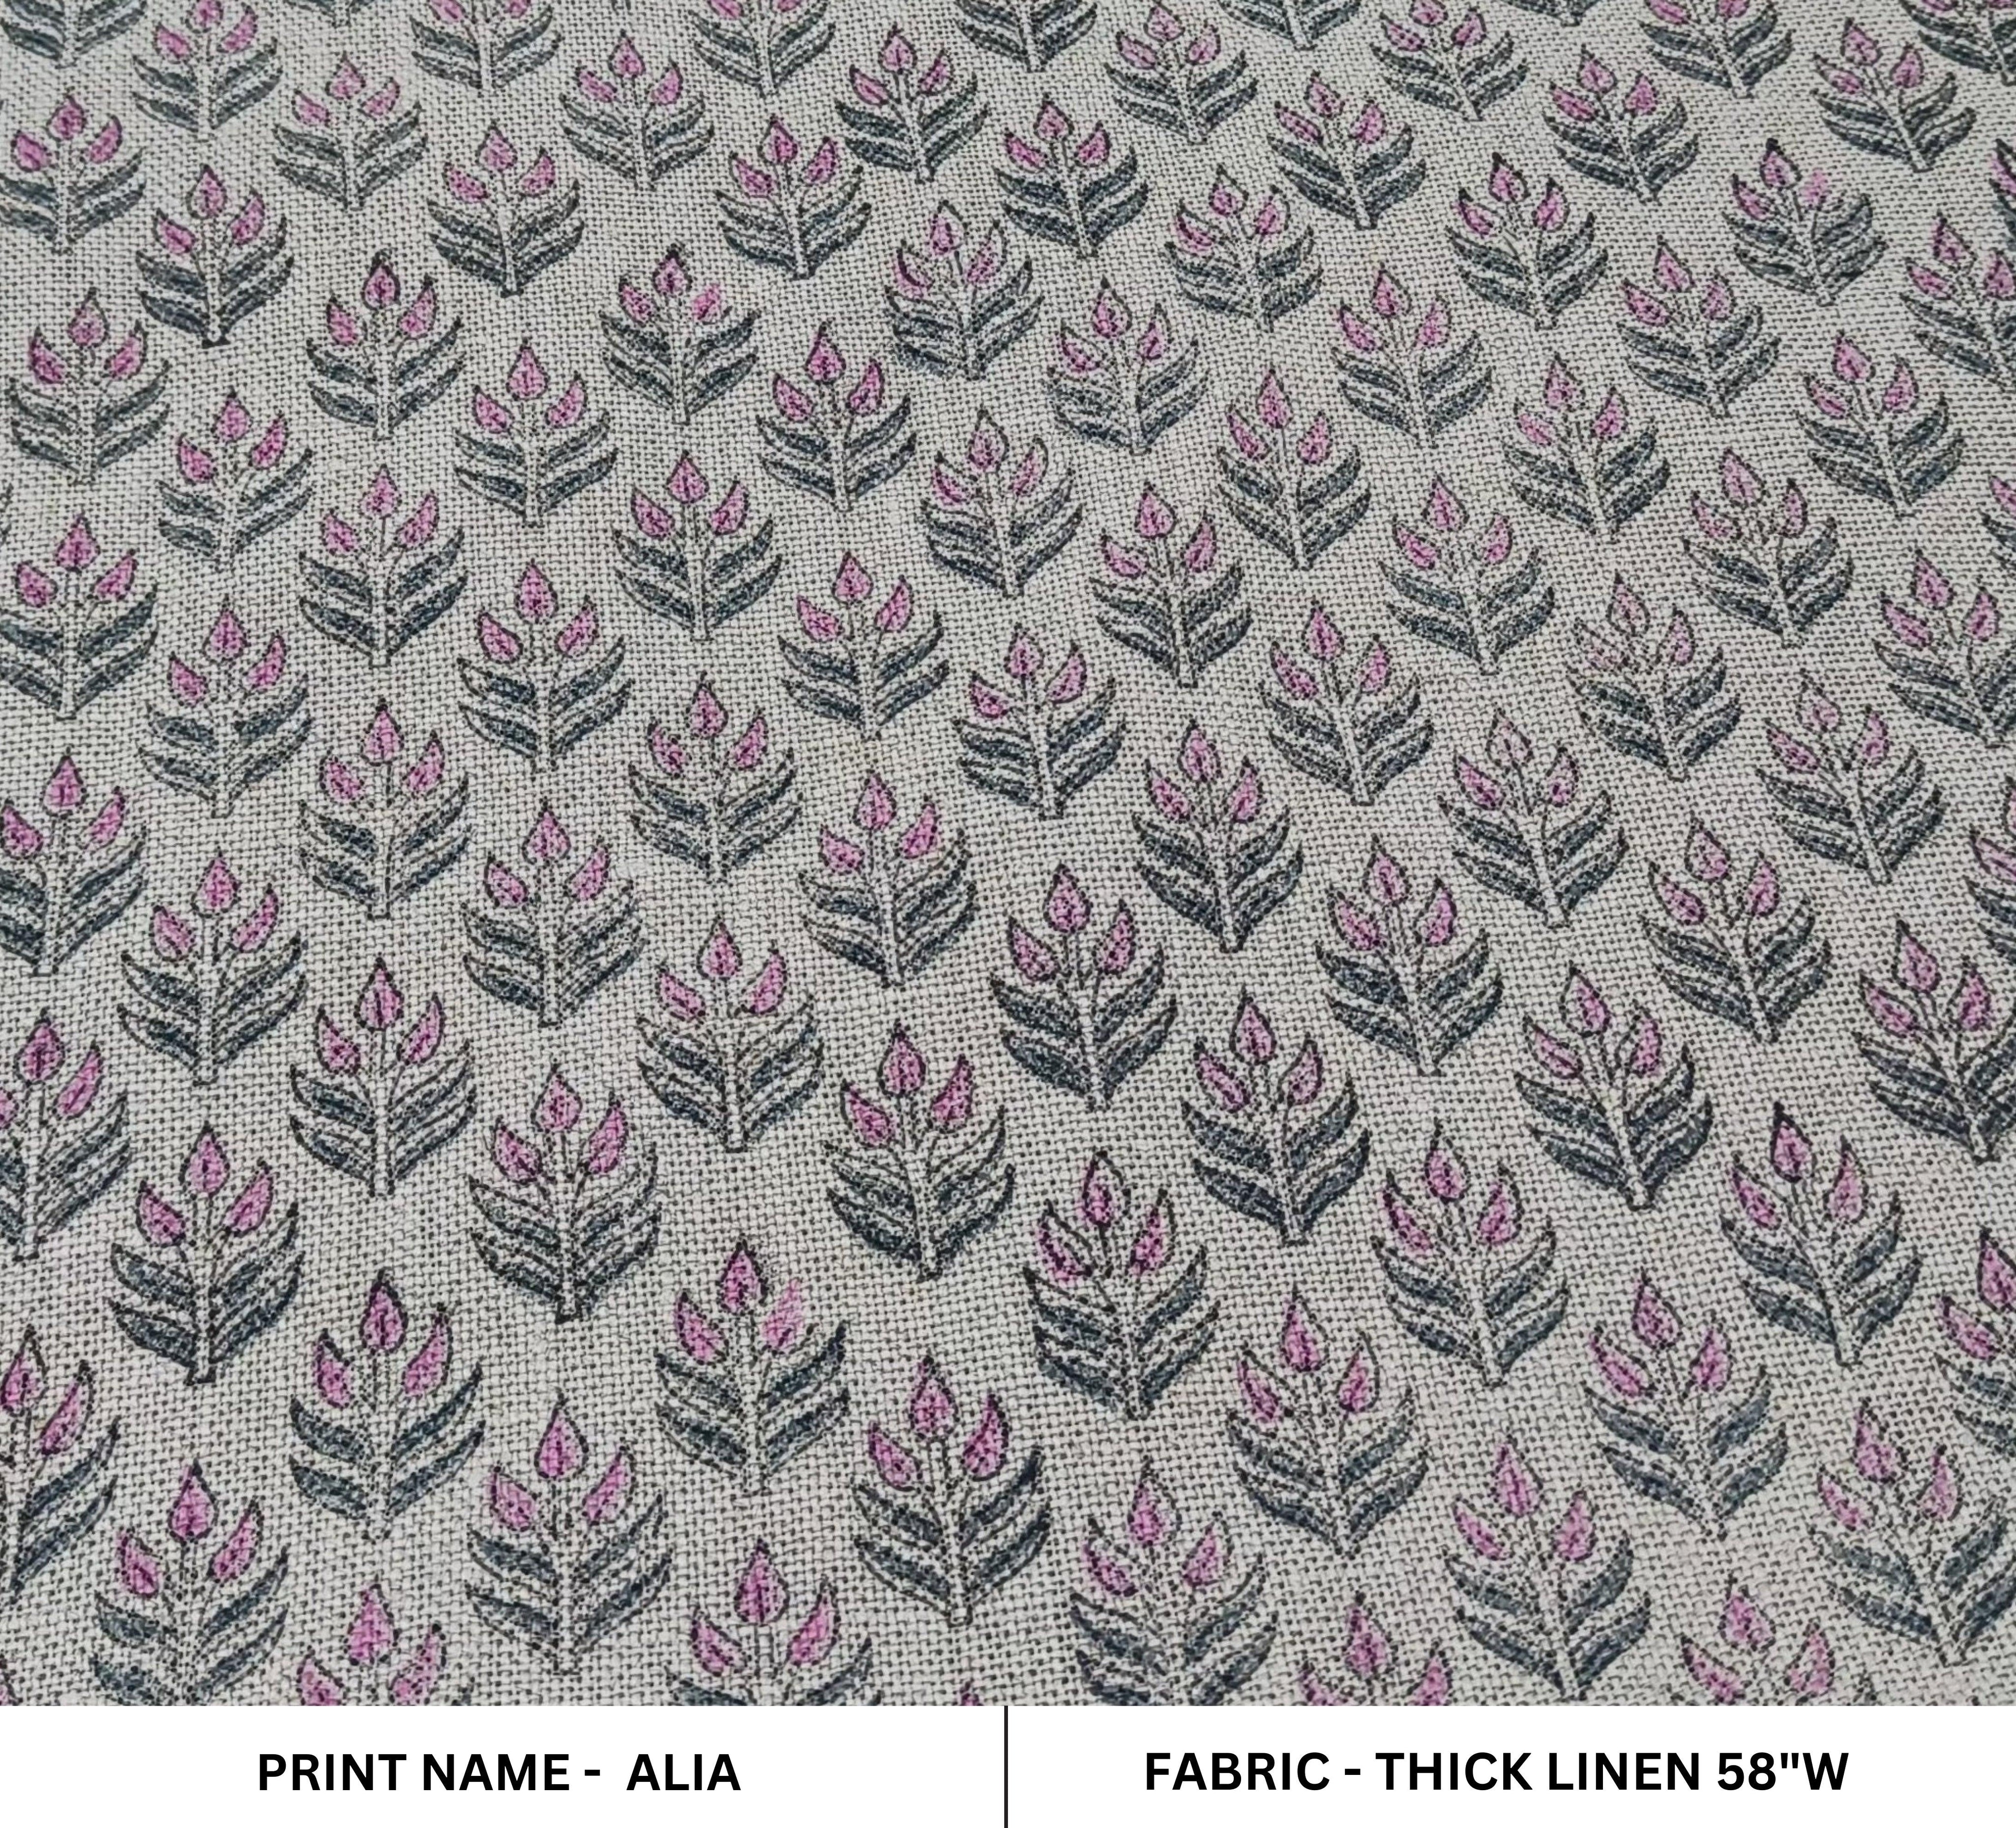 Alia Pink Home Decor Linen,Block Print Fabric,58"Linen By The Yard,Thick 360 Gsm Linen Perfect For Cushion Cover,Upholstery, Curtains